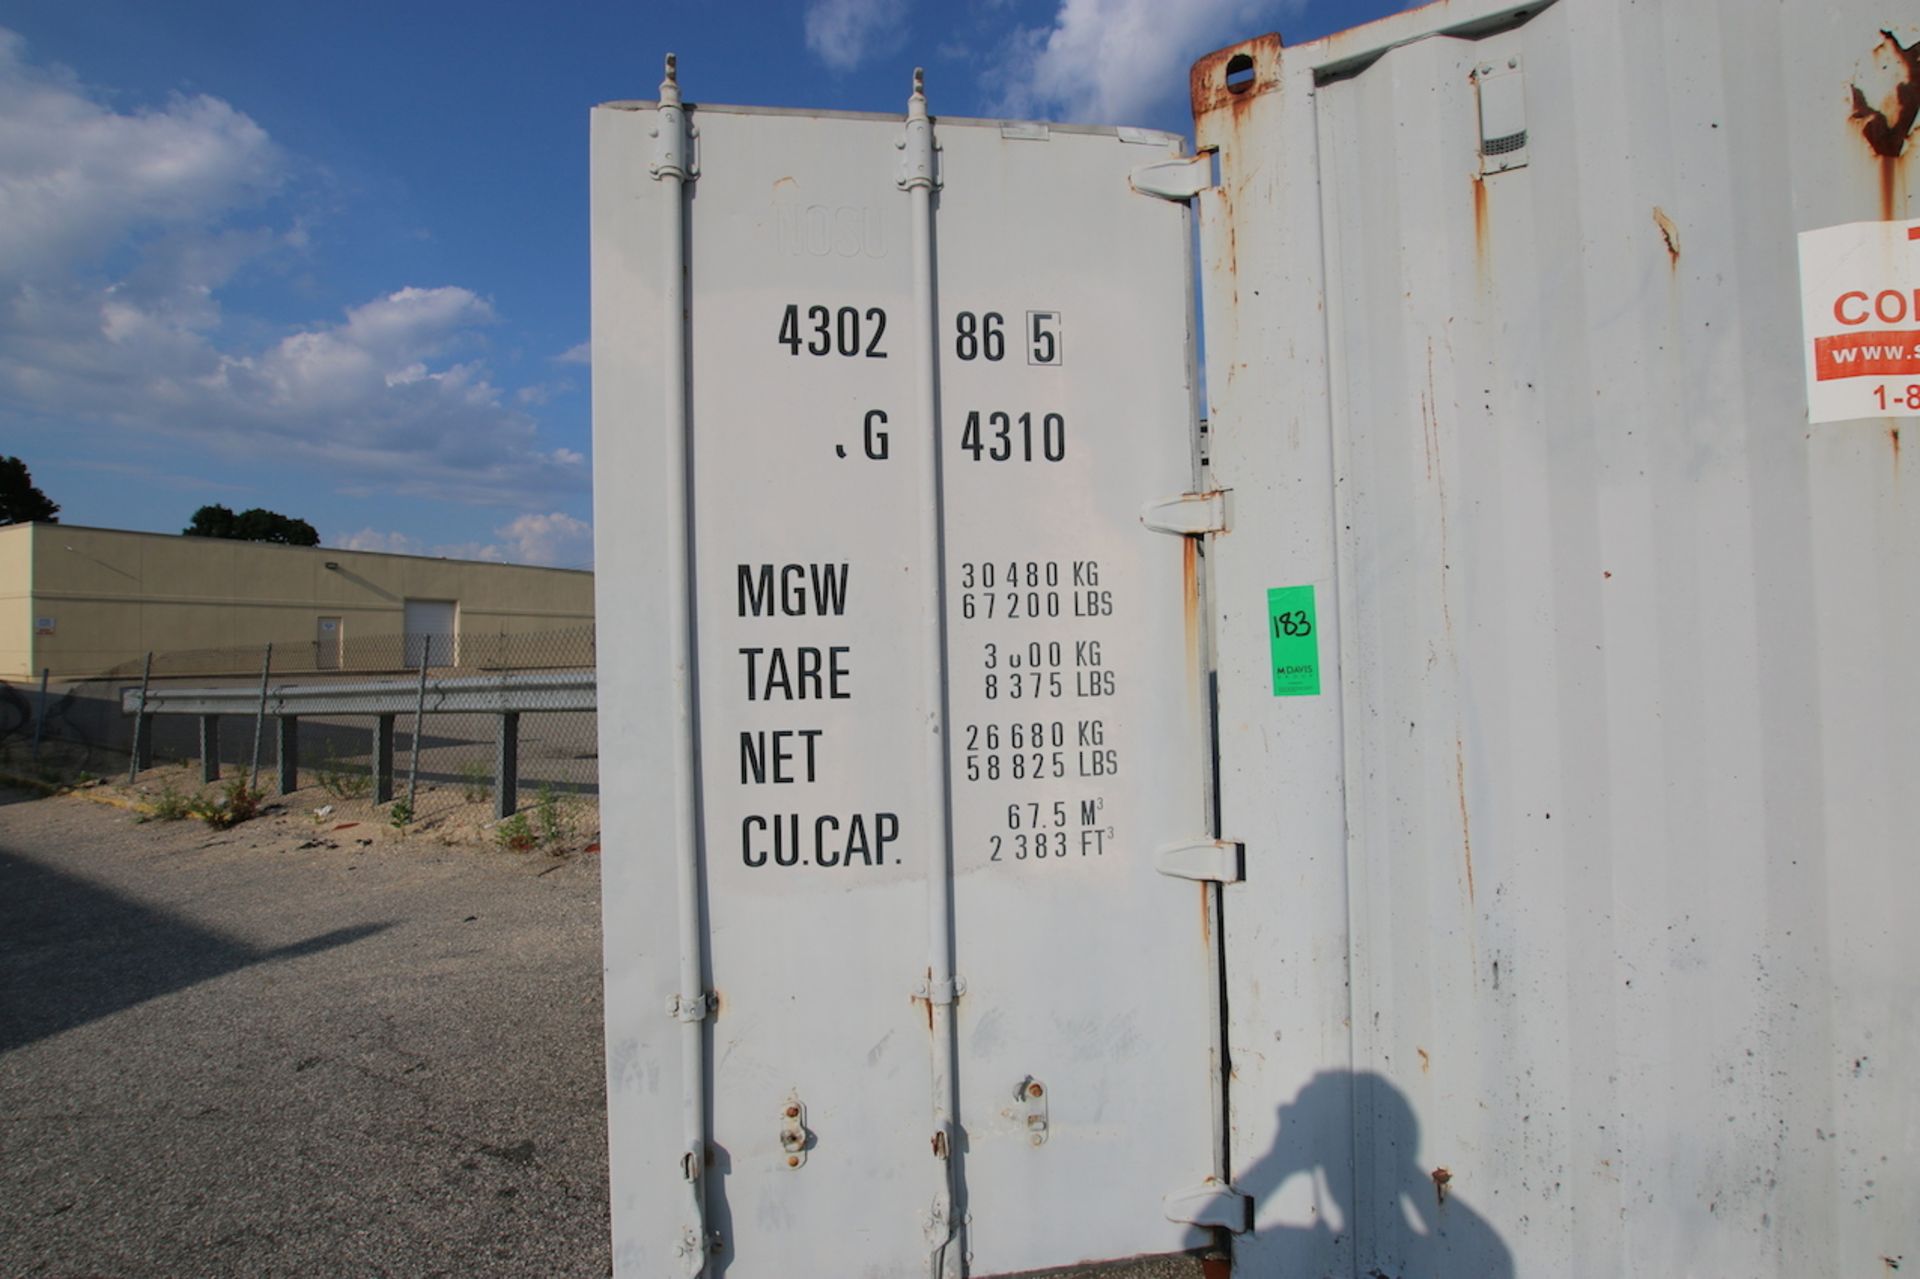 International Cargo Shipping Container, Dims.: 38'5" L x 8' W x 7'10" H - Image 2 of 5